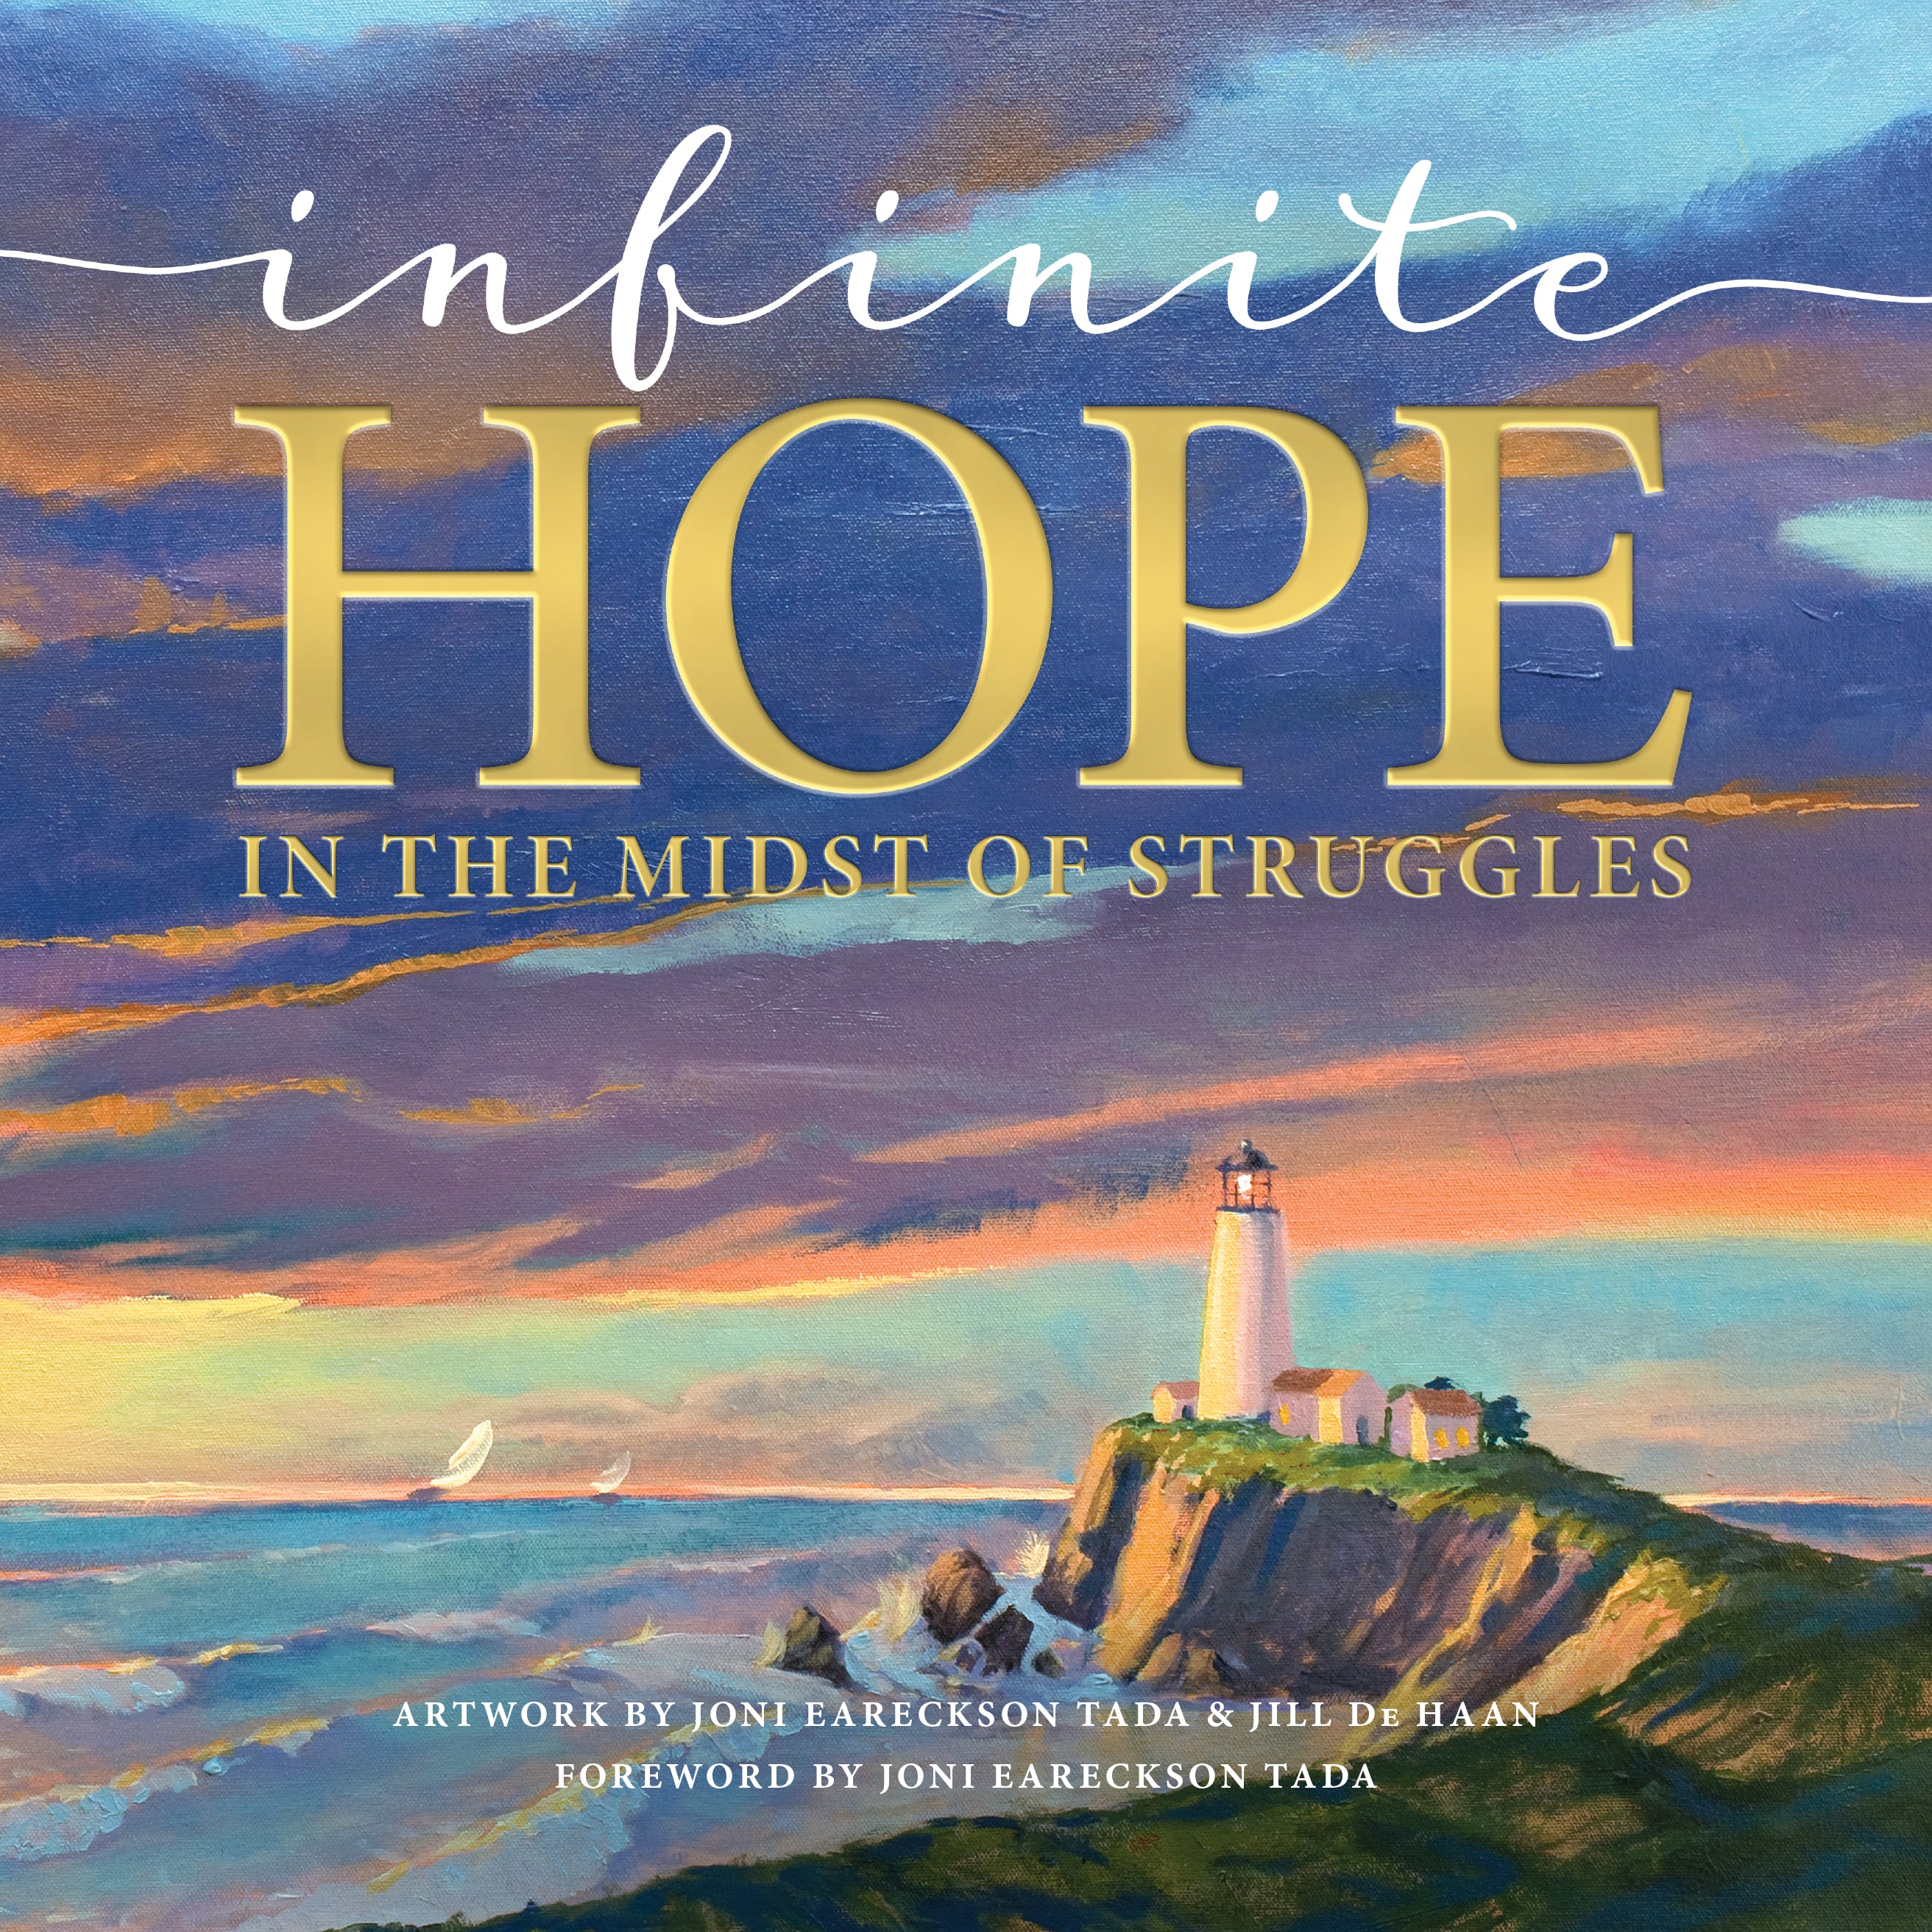 Image of Infinite Hope . . . in the Midst of Struggles other